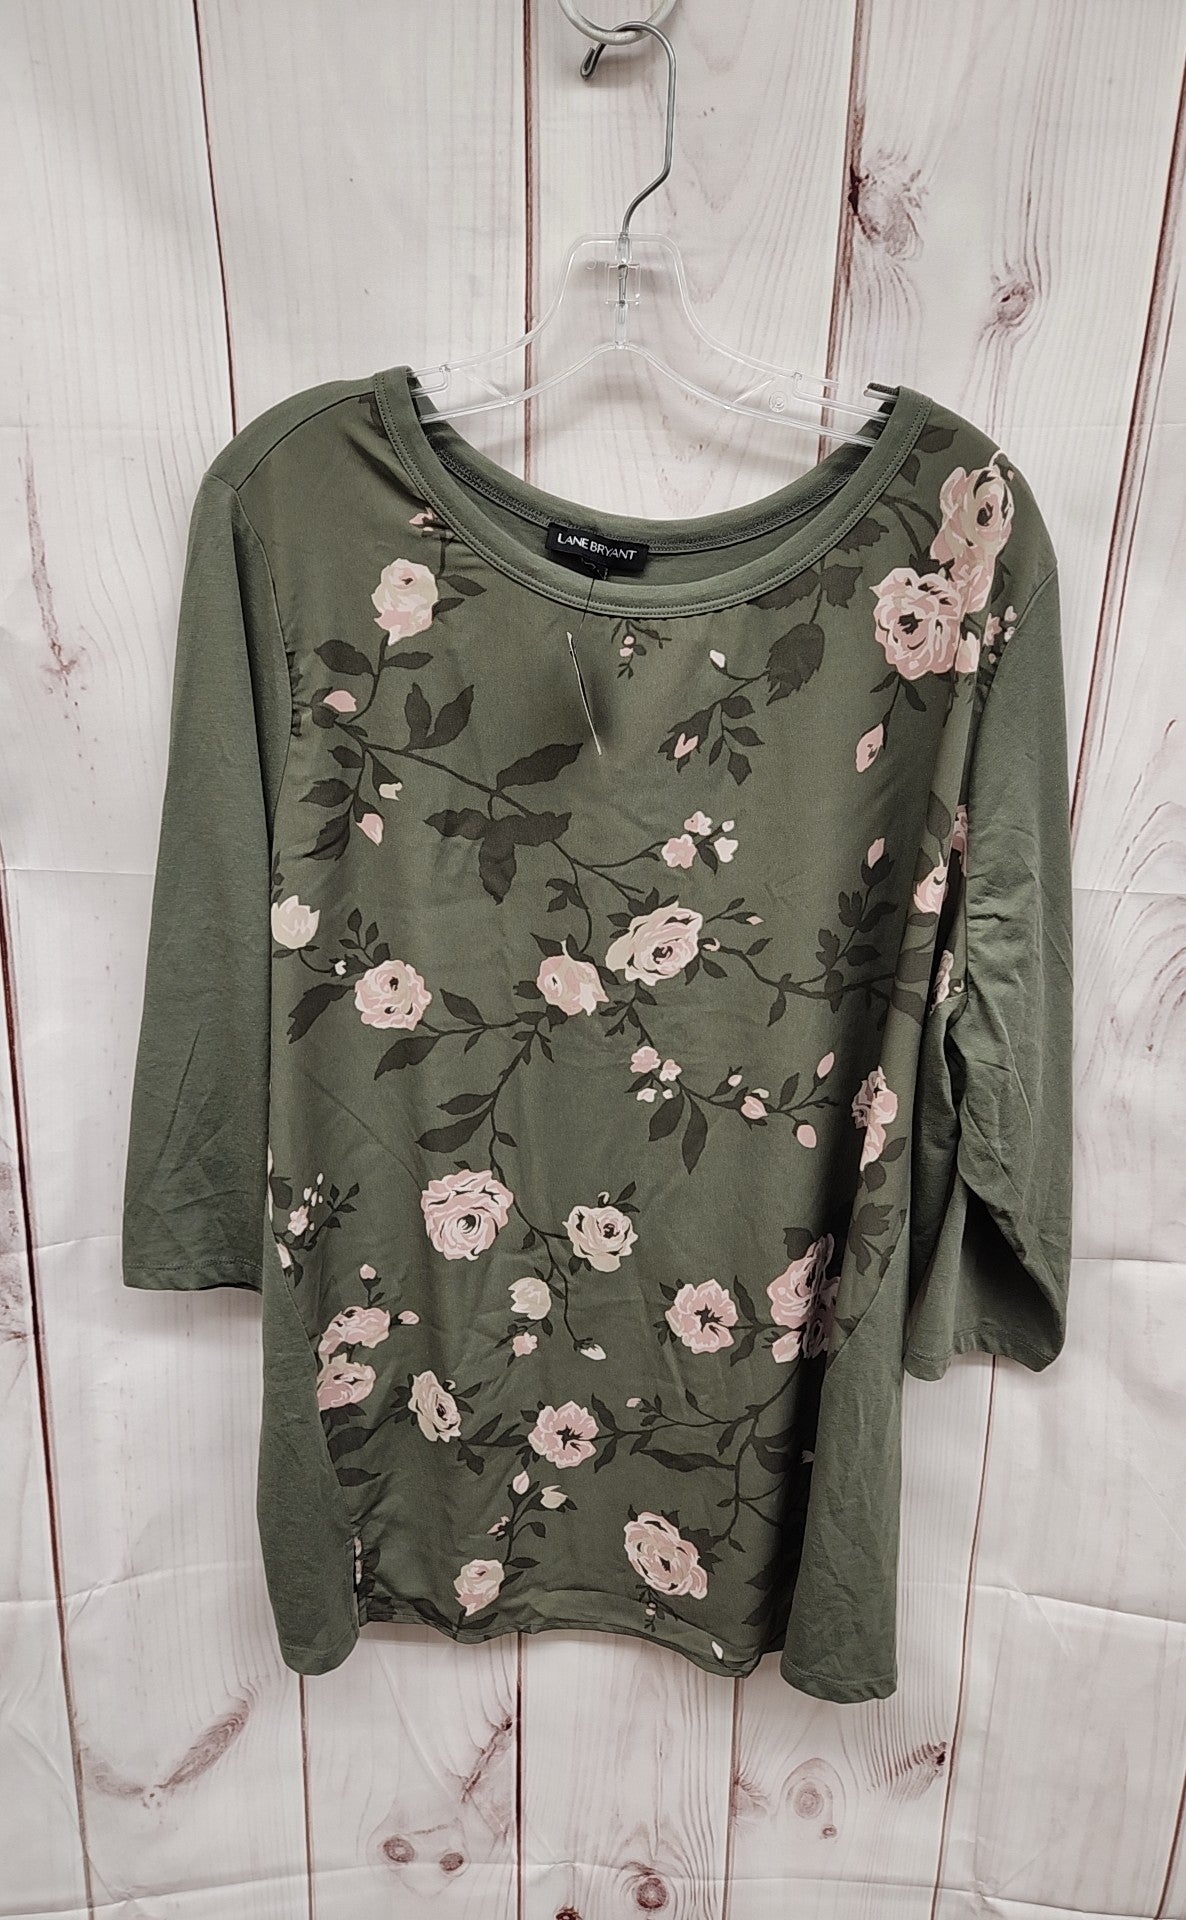 Lane Bryant Women's Size 18/20 Olive 3/4 Sleeve Top